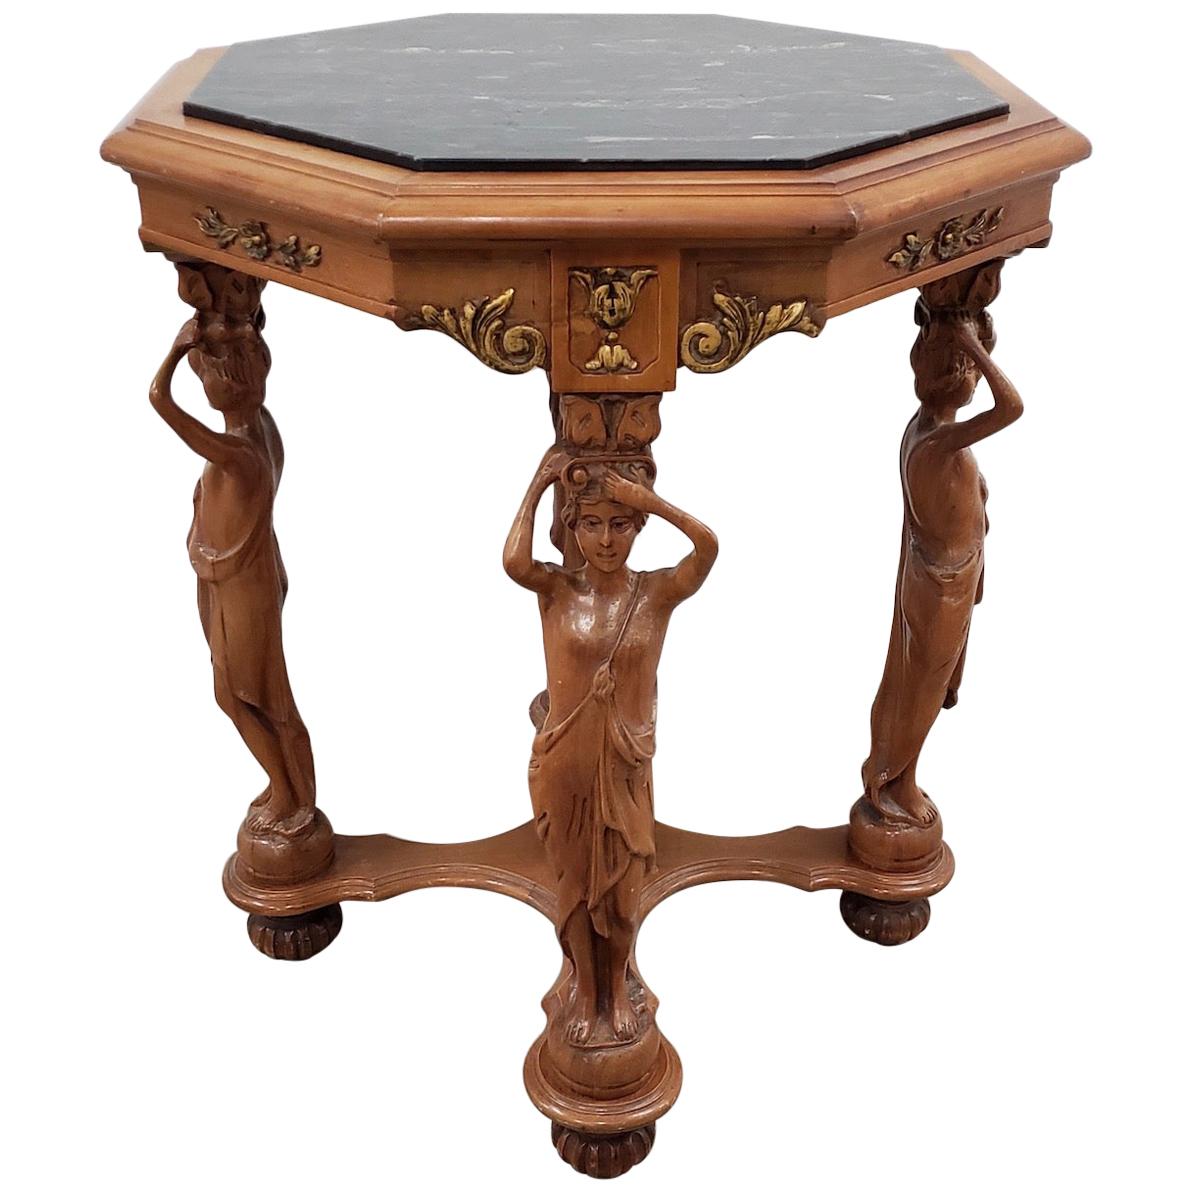 Vintage Carved Walnut and Marble Top Octagon Side Table, circa 1940